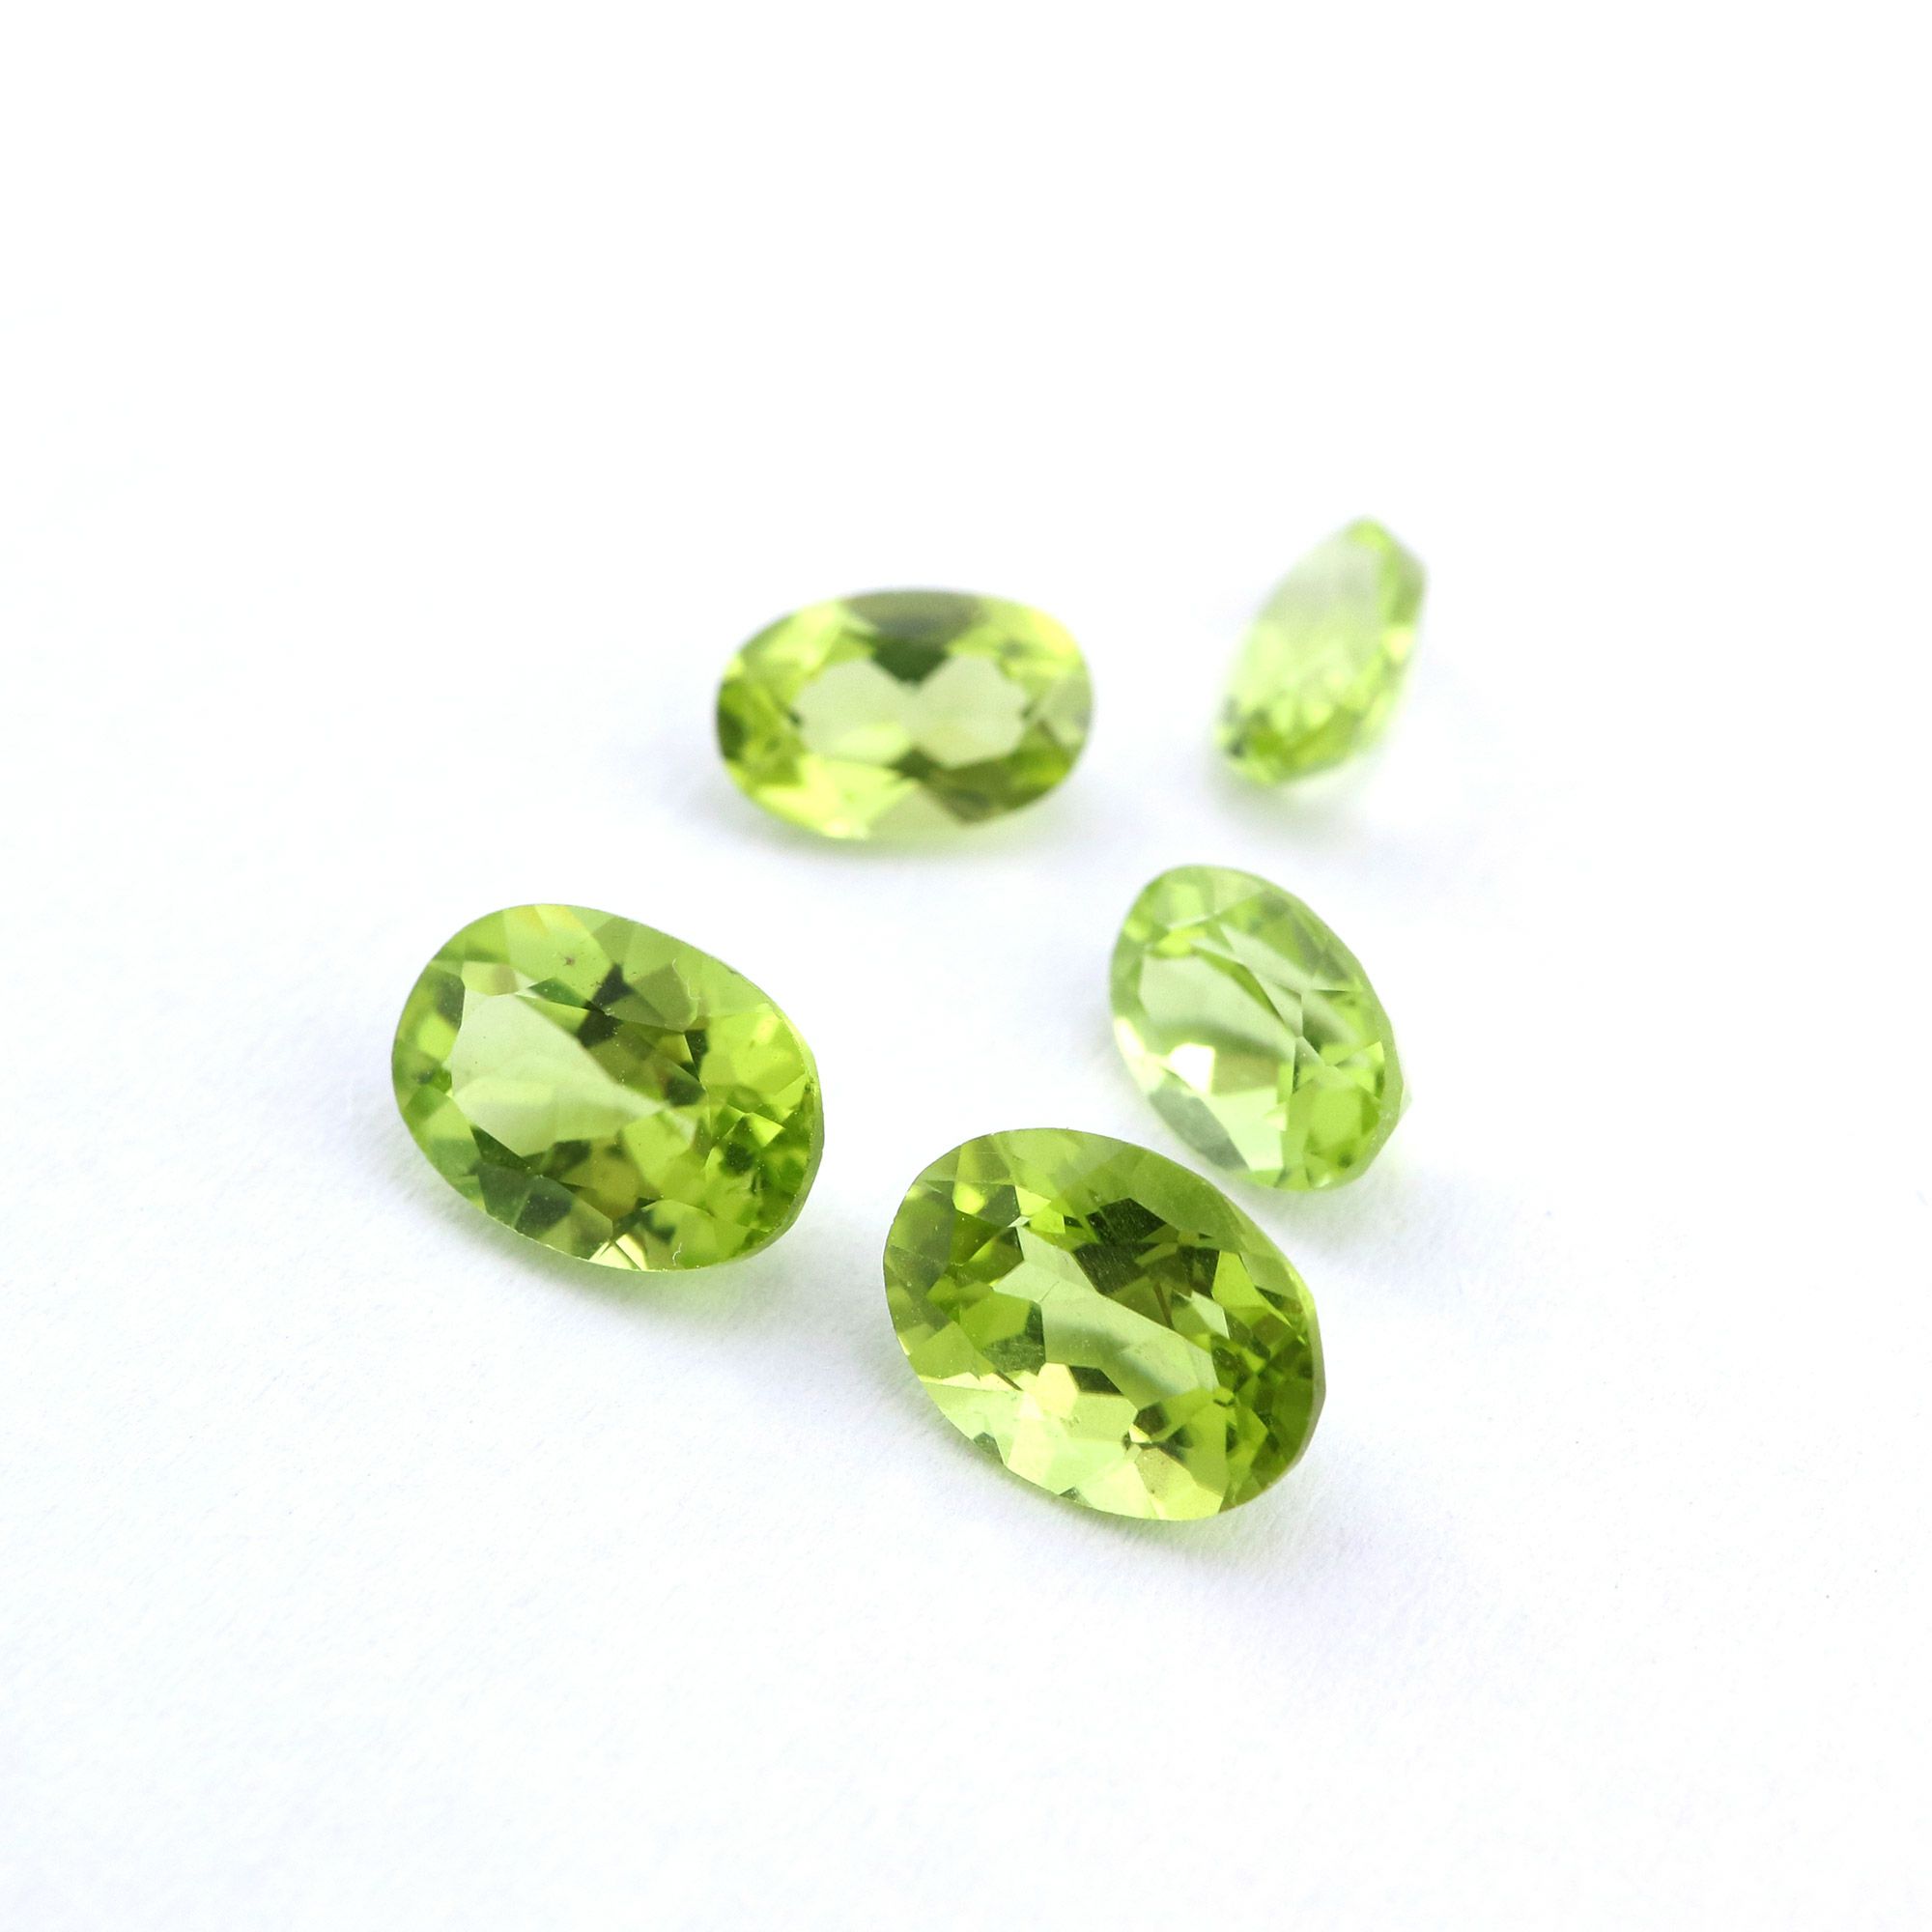 1Pcs Oval Green Peridot August Birthstone Faceted Cut Loose Gemstone Natural Semi Precious Stone DIY Jewelry Supplies 4120122 - Click Image to Close